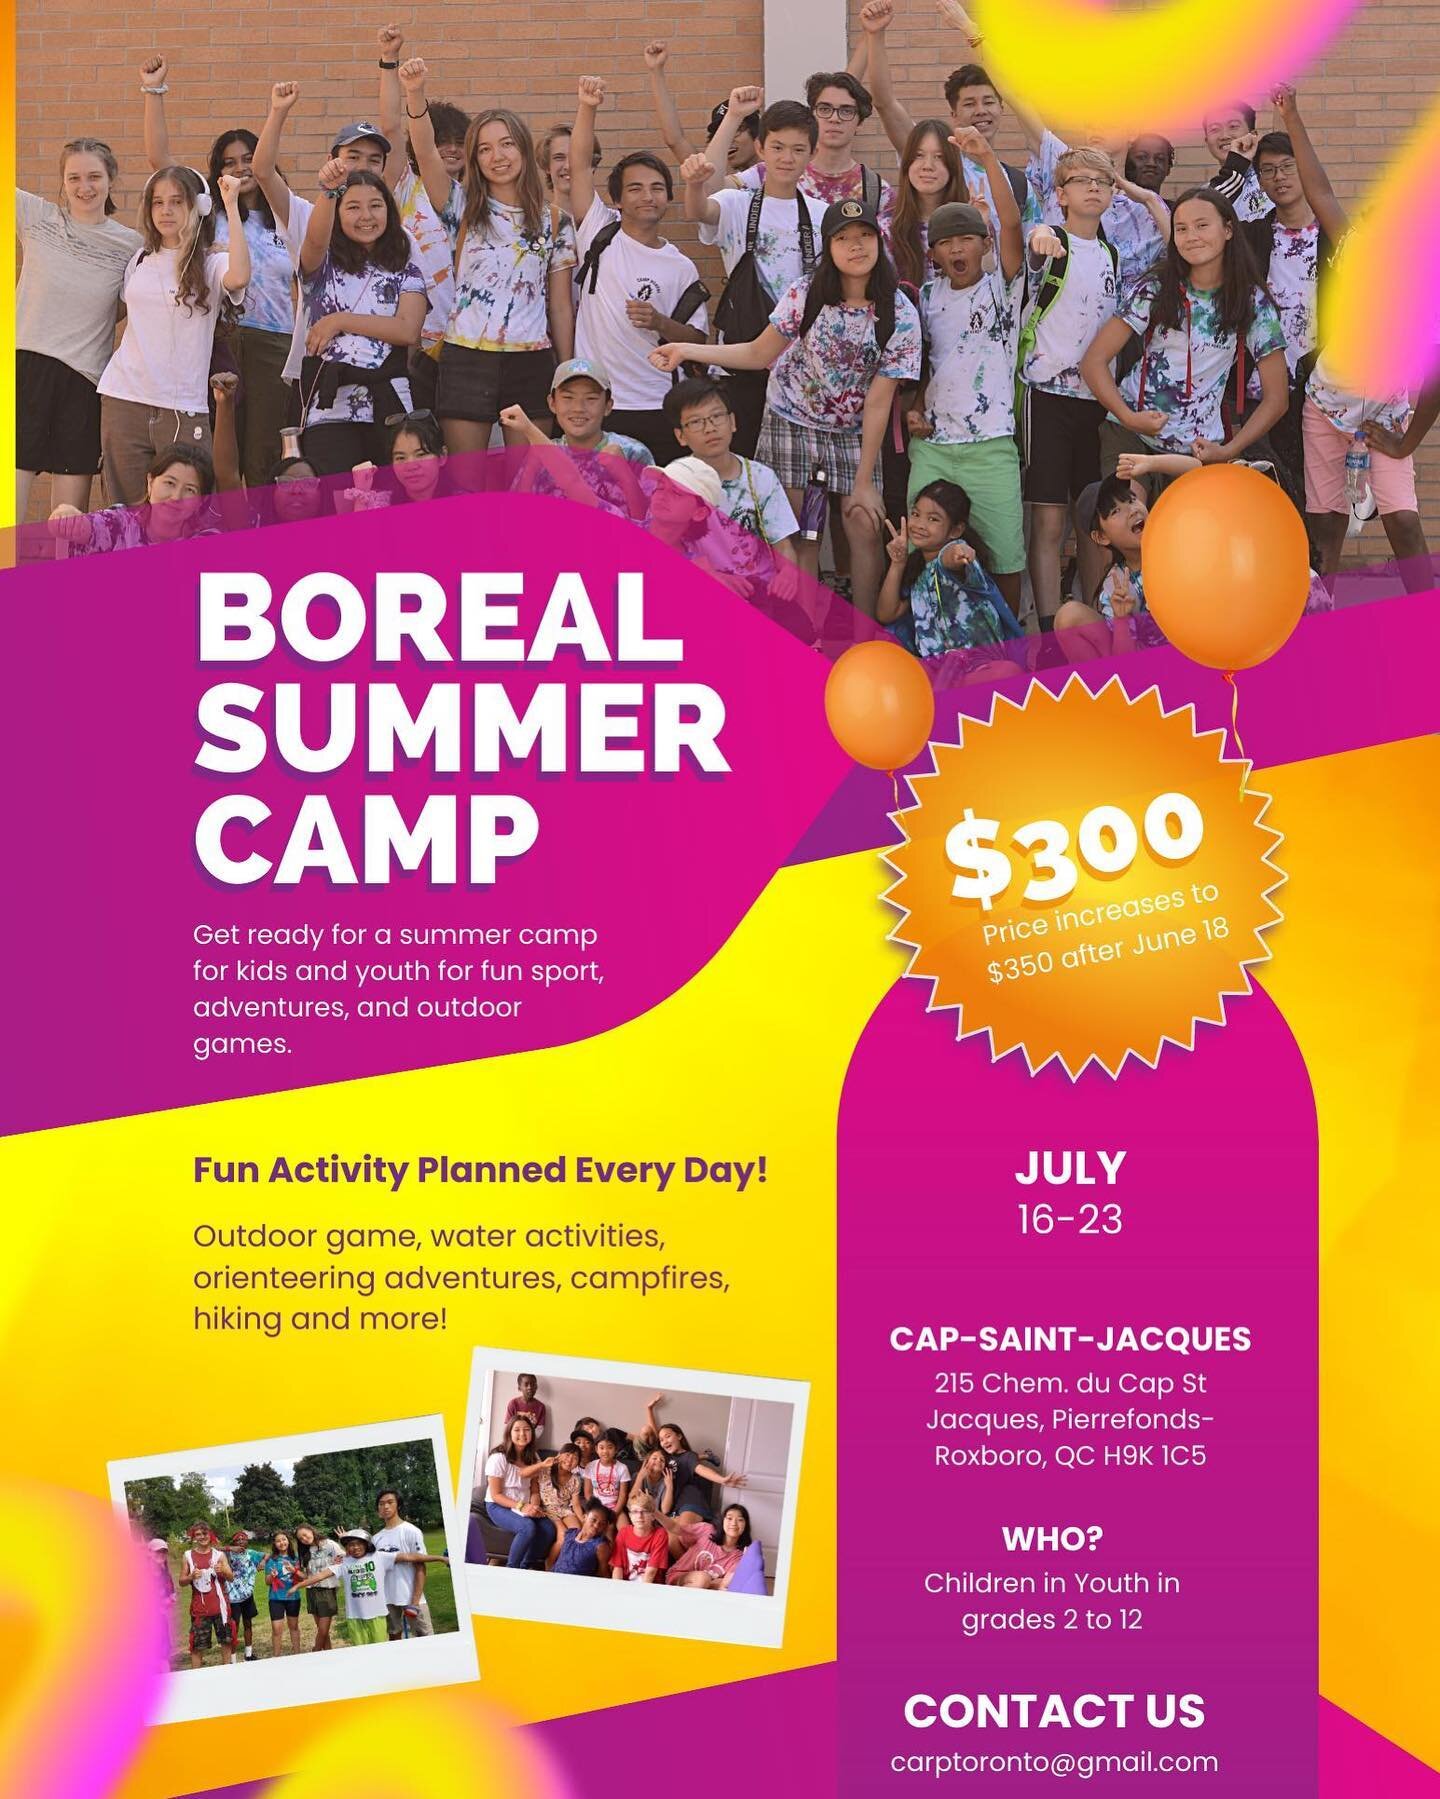 Registration for Camp Boreal in Quebec, Canada is still open for this summer! Anyone entering 2-12th grade is welcome yay!
⠀⠀⠀⠀⠀⠀⠀⠀⠀
Dates: July 16-23
Cost: $350 CAD (approx. $265 USD)
Registration (link in bio too): https://forms.gle/q14S7VkSD3Tc3Ld